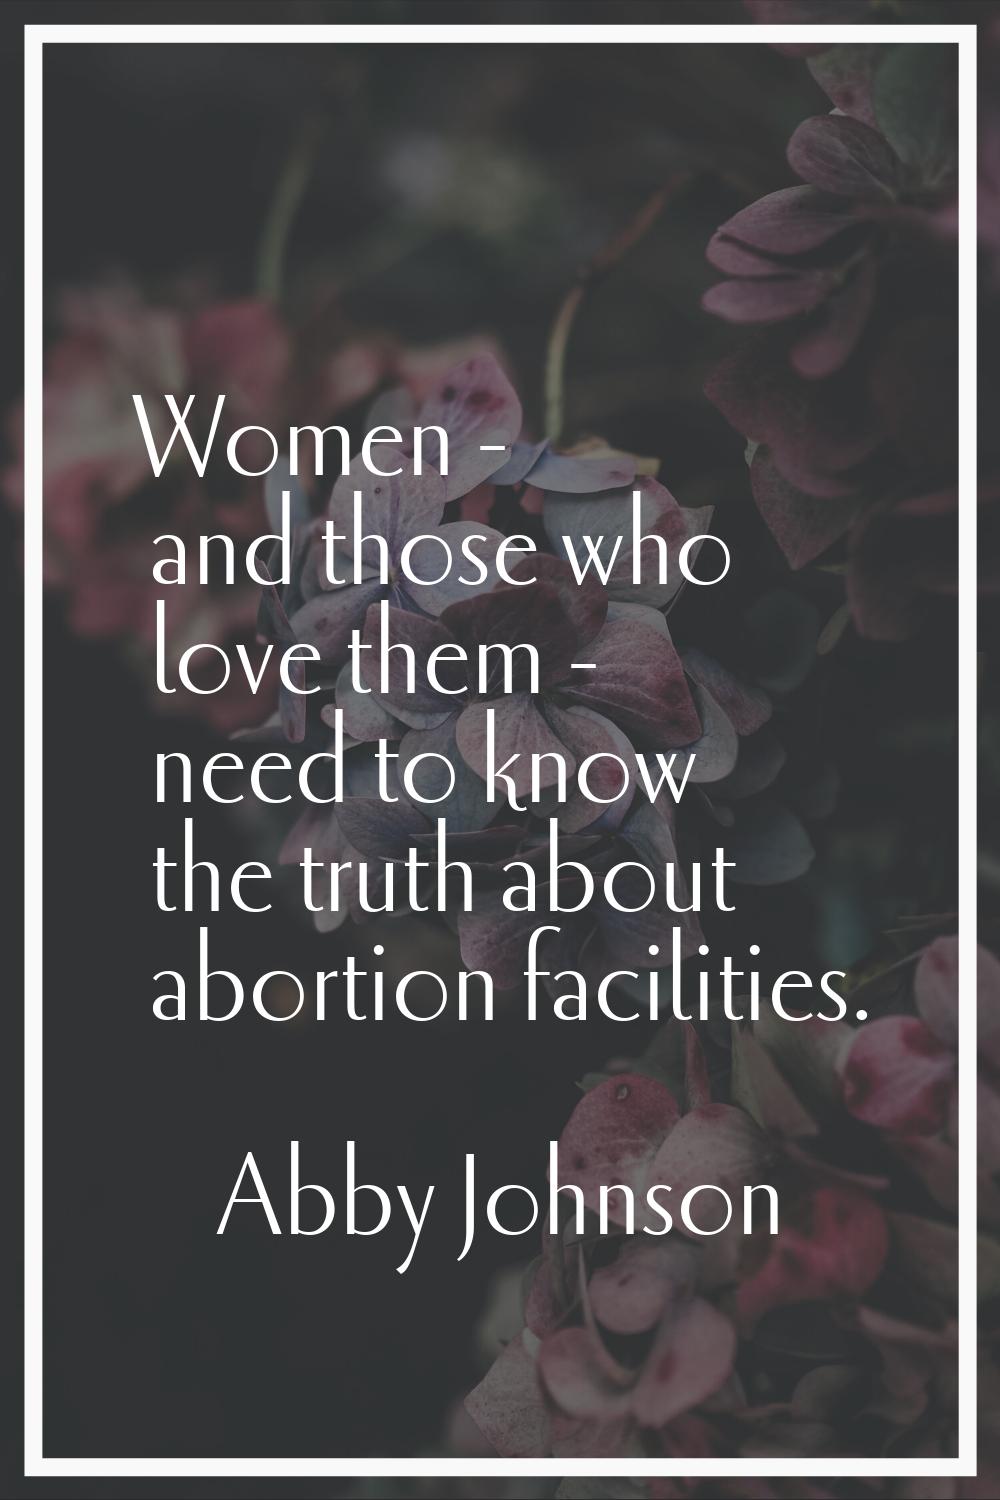 Women - and those who love them - need to know the truth about abortion facilities.